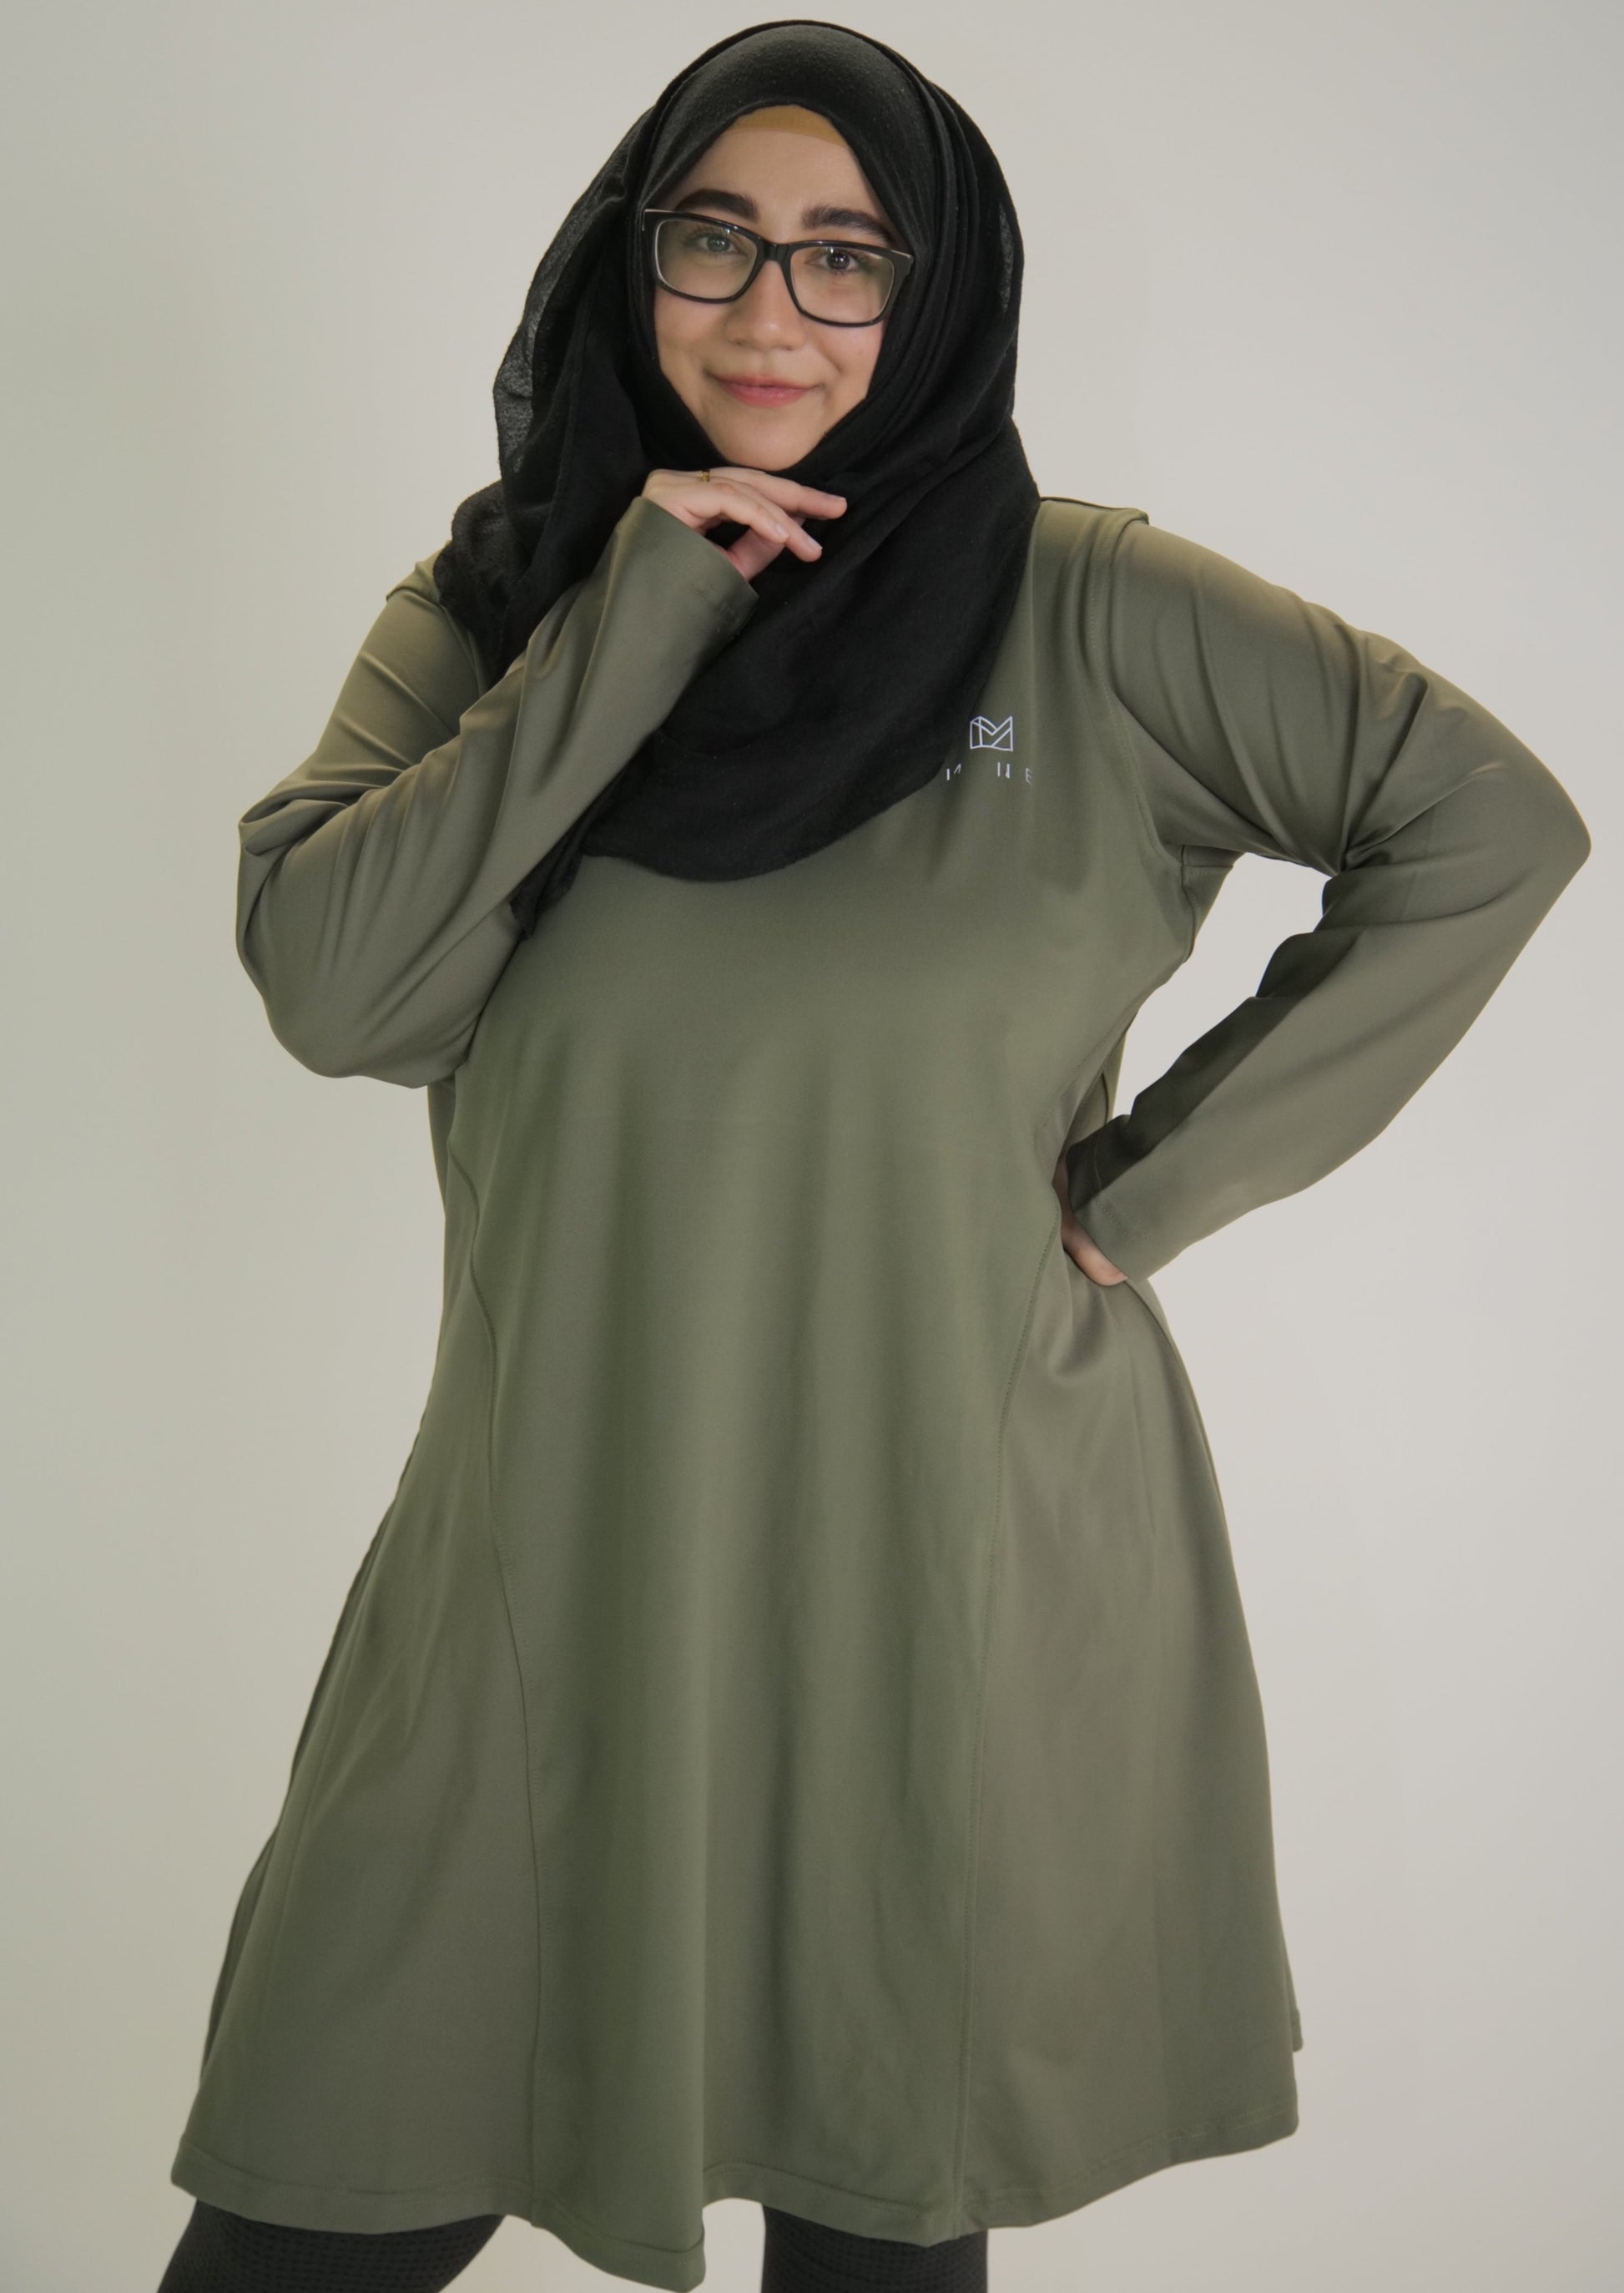 The Saudi Modest Sportswear Designer You Need To Know About